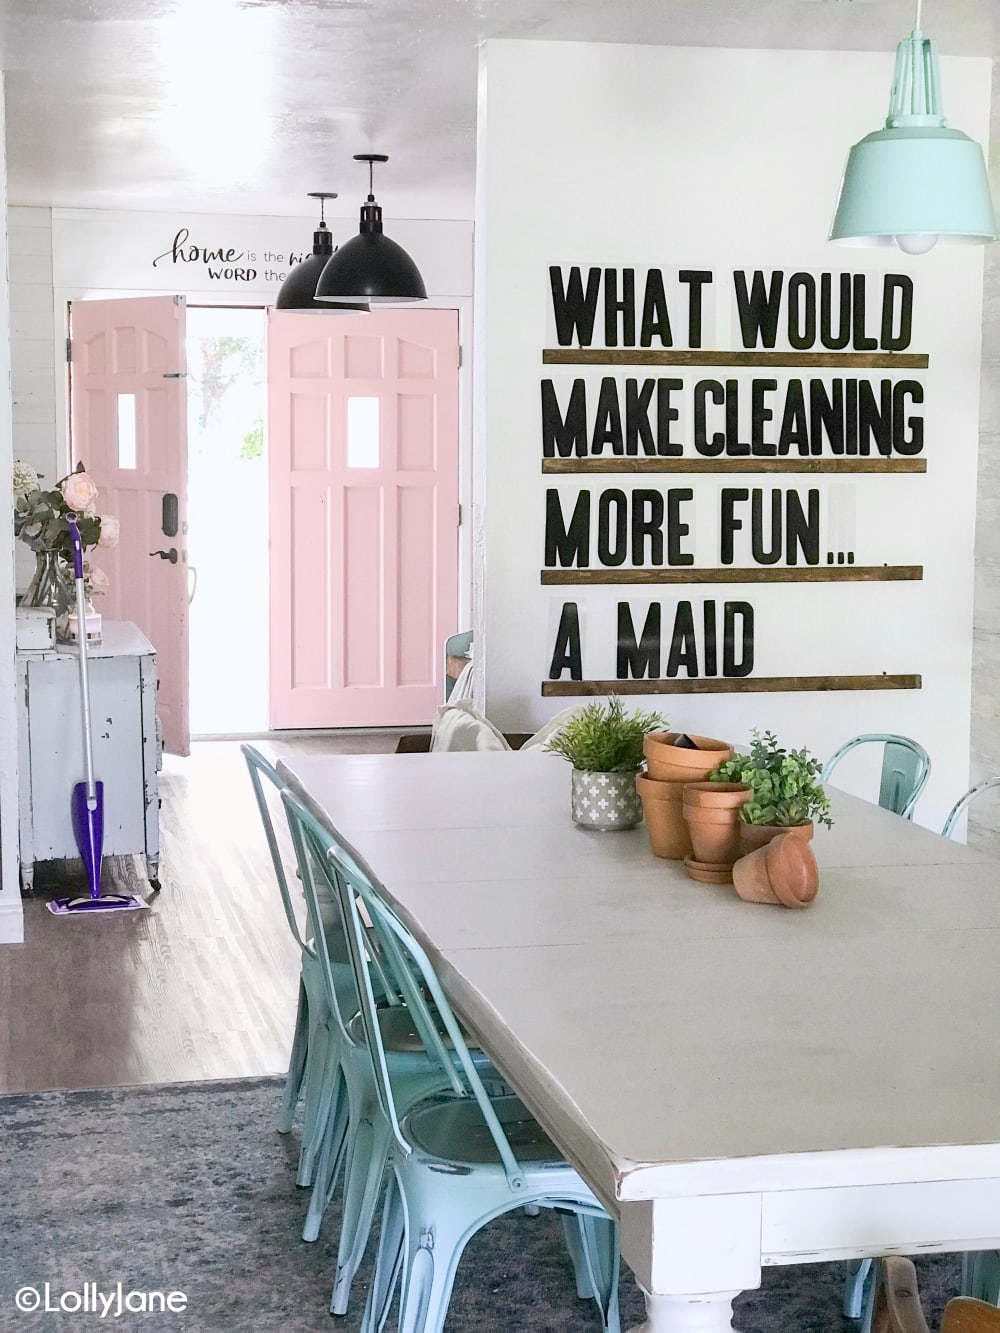 Love me some lazy summer days playing indoors but don’t love the messes on my wood floors, so glad to have @Swiffer WetJet Wood in my cleaning arsenal to tackle clean up✨🧽 Available at @Walmart! #IHeartWoodFloors